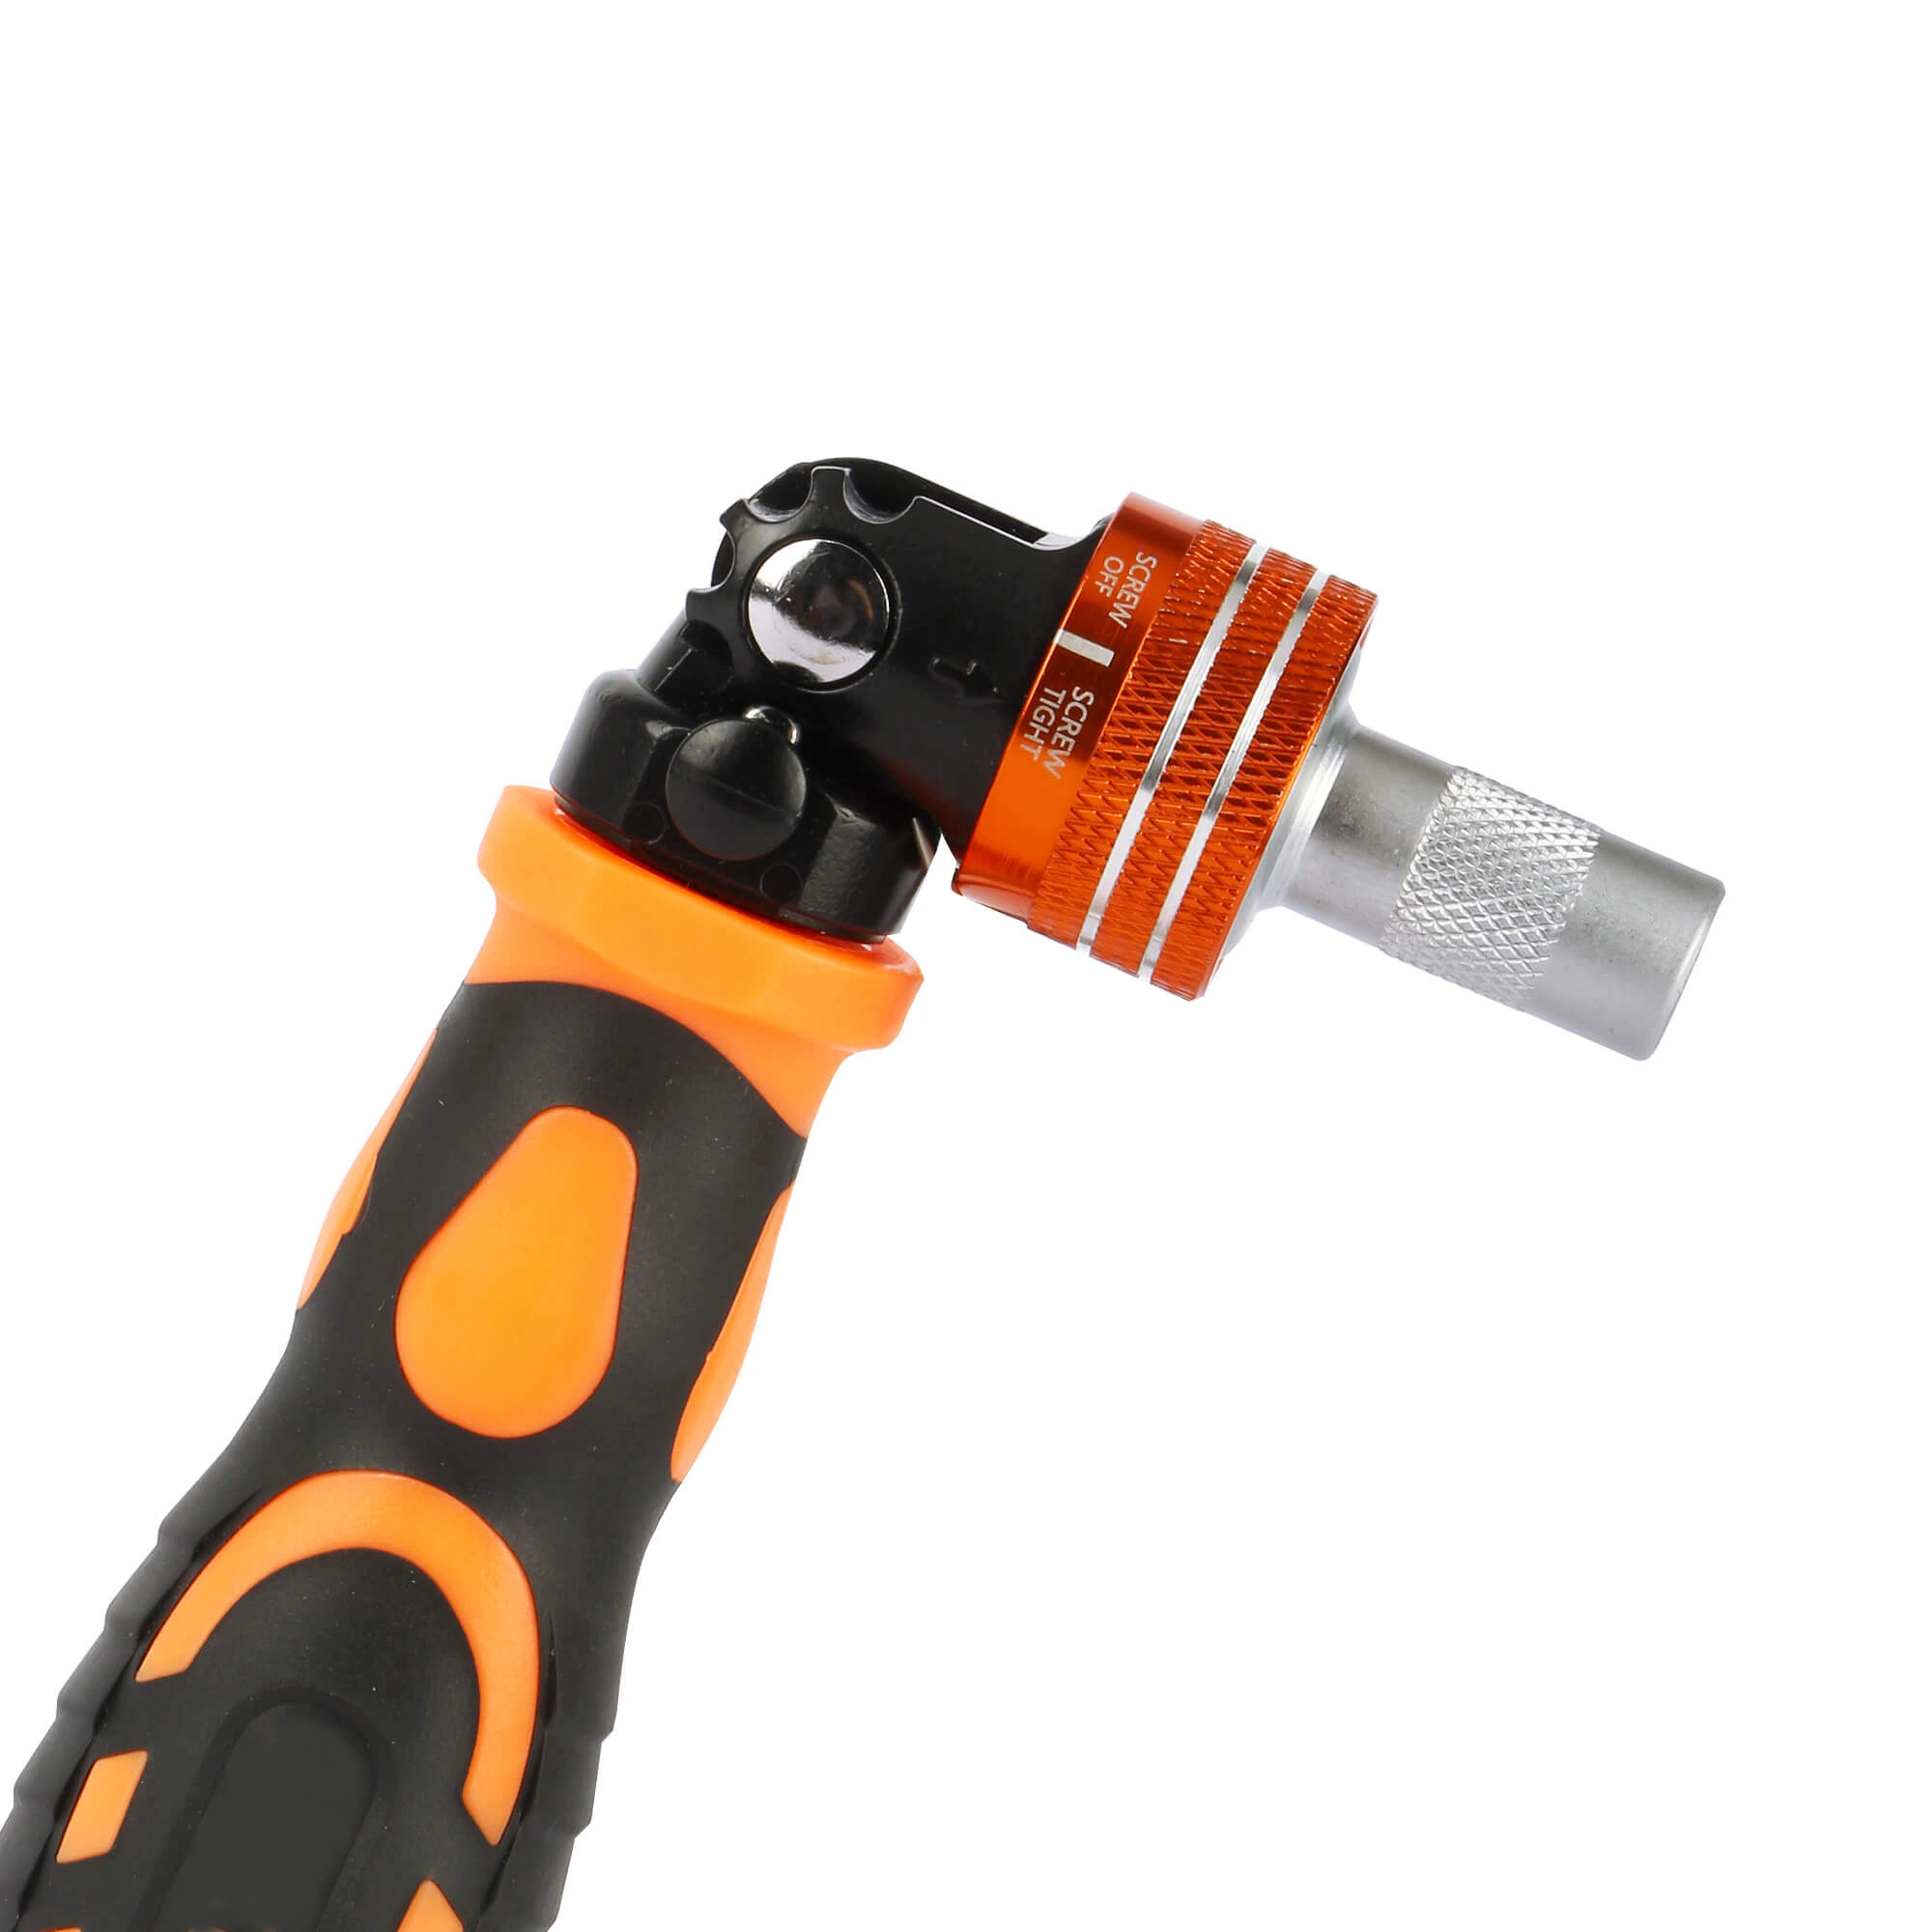 Professional 31 in 1 Repair Tool Set with Rotatable Ratchet Handle